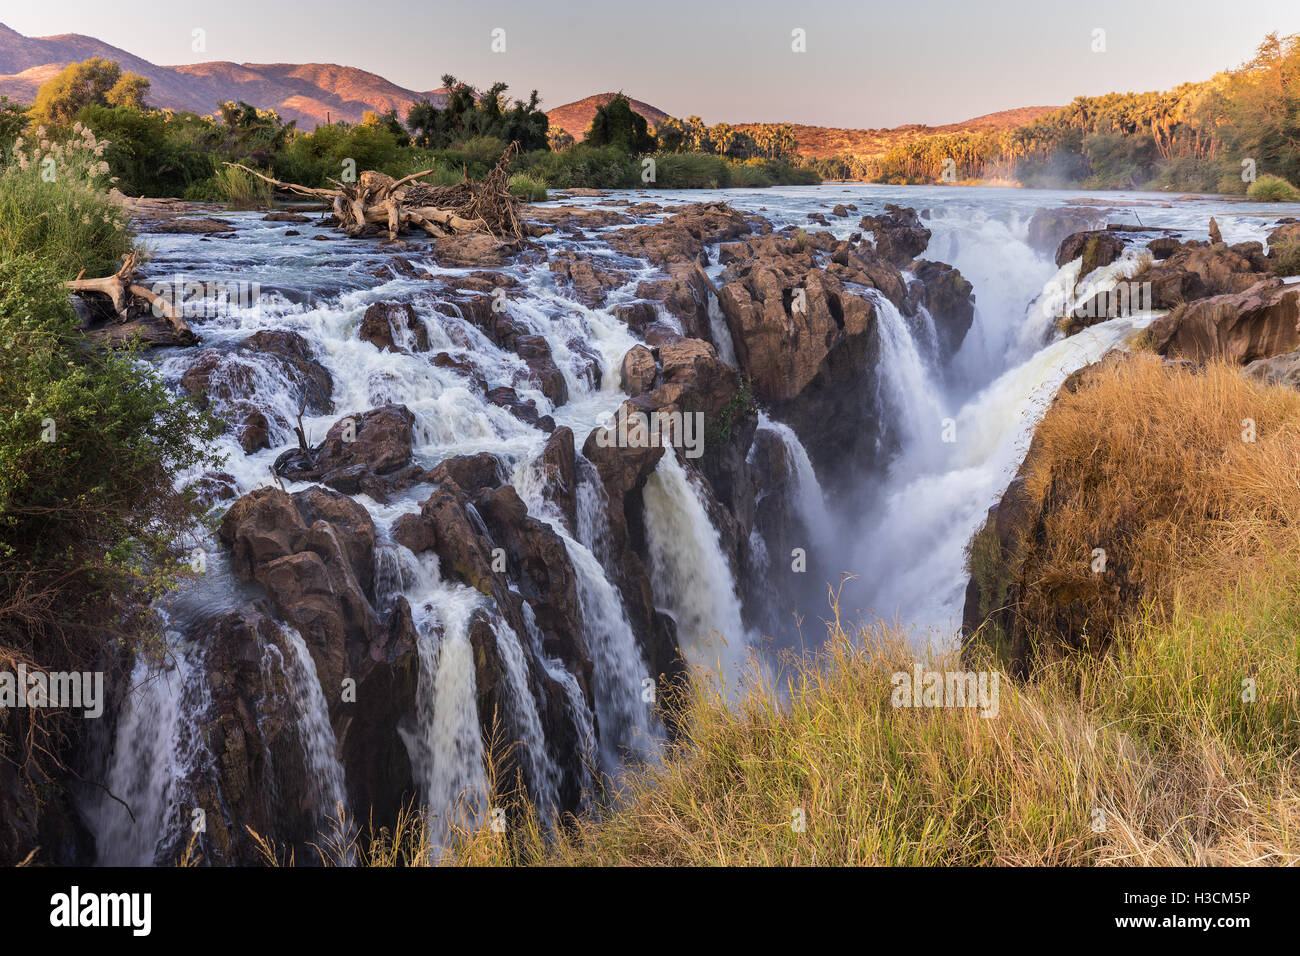 Multiple streams comprise the Epupa falls, on the Kunene river in the Kaokoveld of Northern Namibia, on the border with Angola. Stock Photo